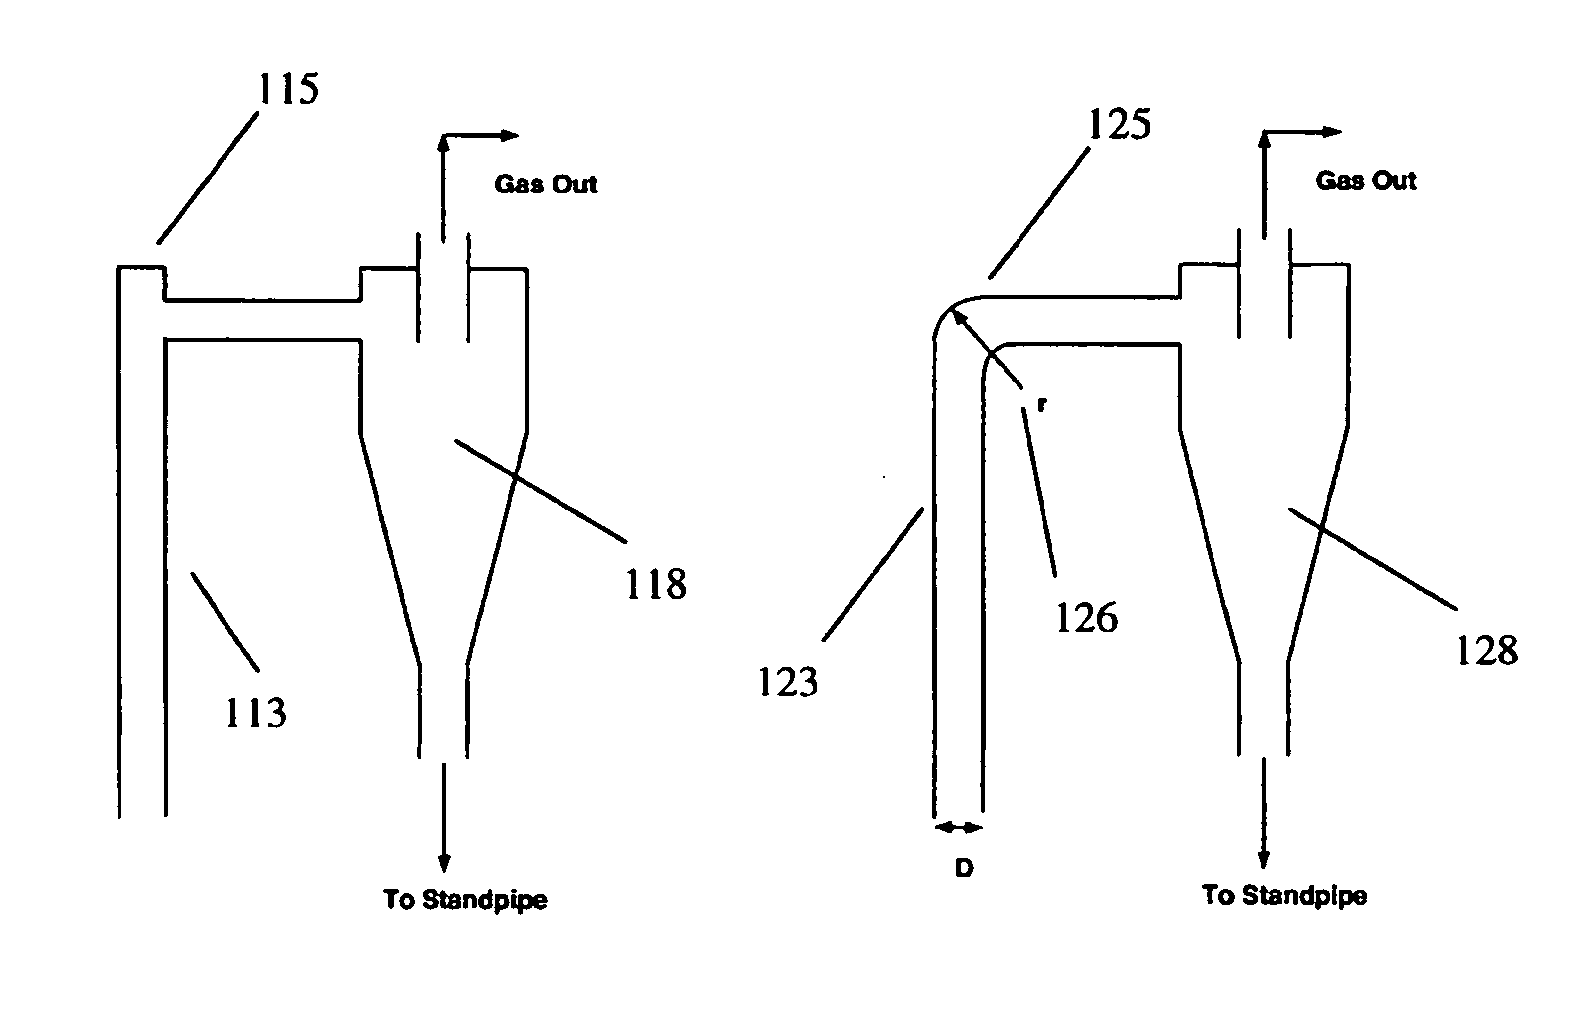 Riser termination devices for reduced catalyst attrition and losses